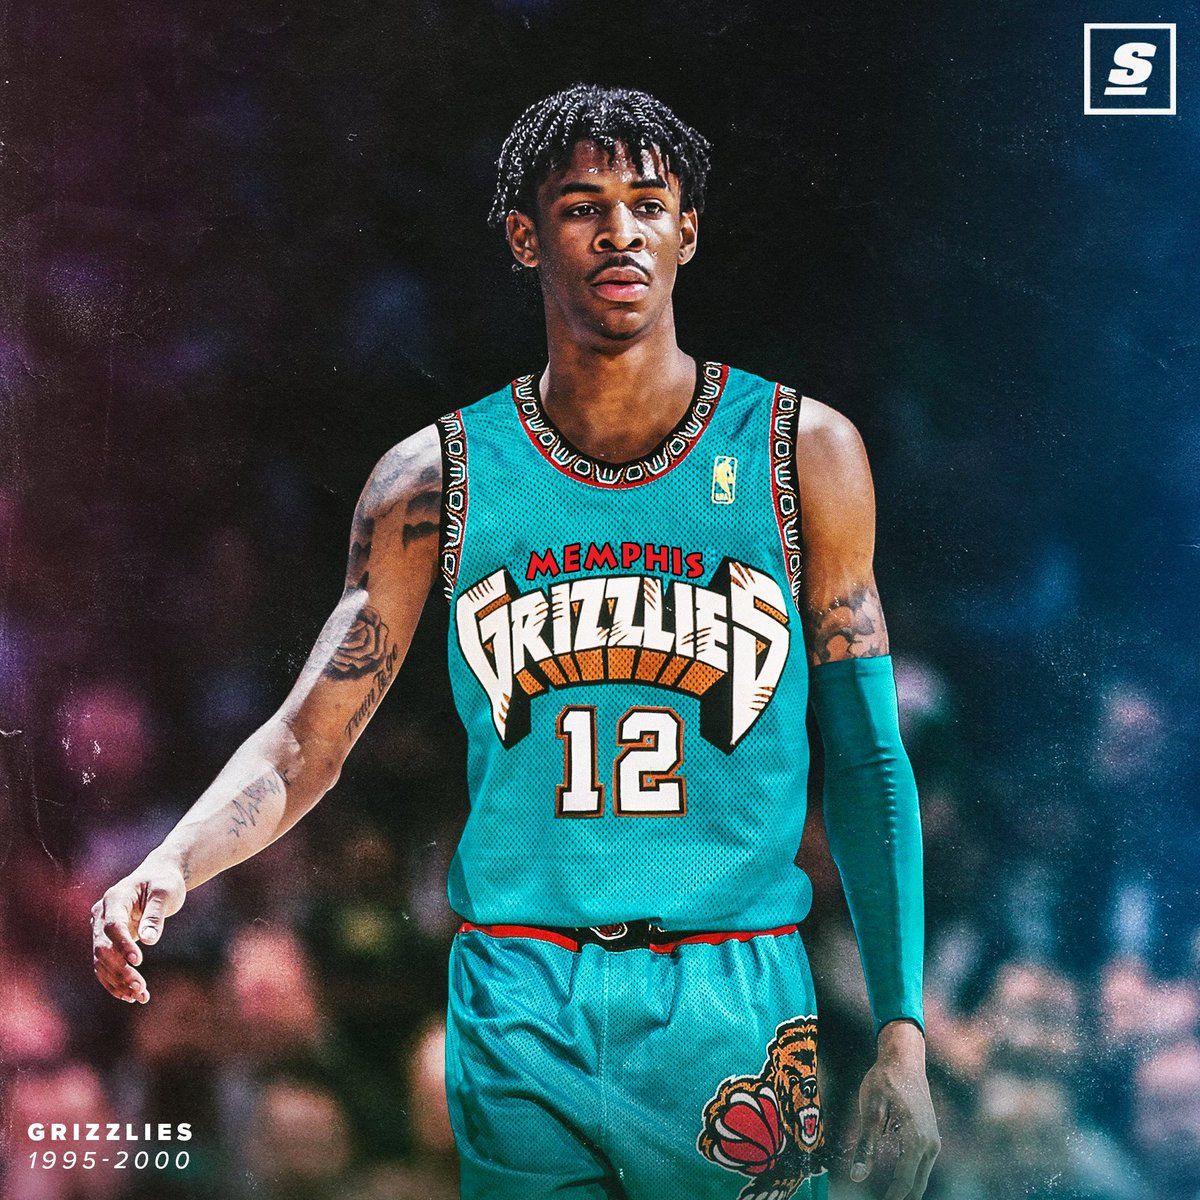 Ja Morant't have to say vancouver. can put